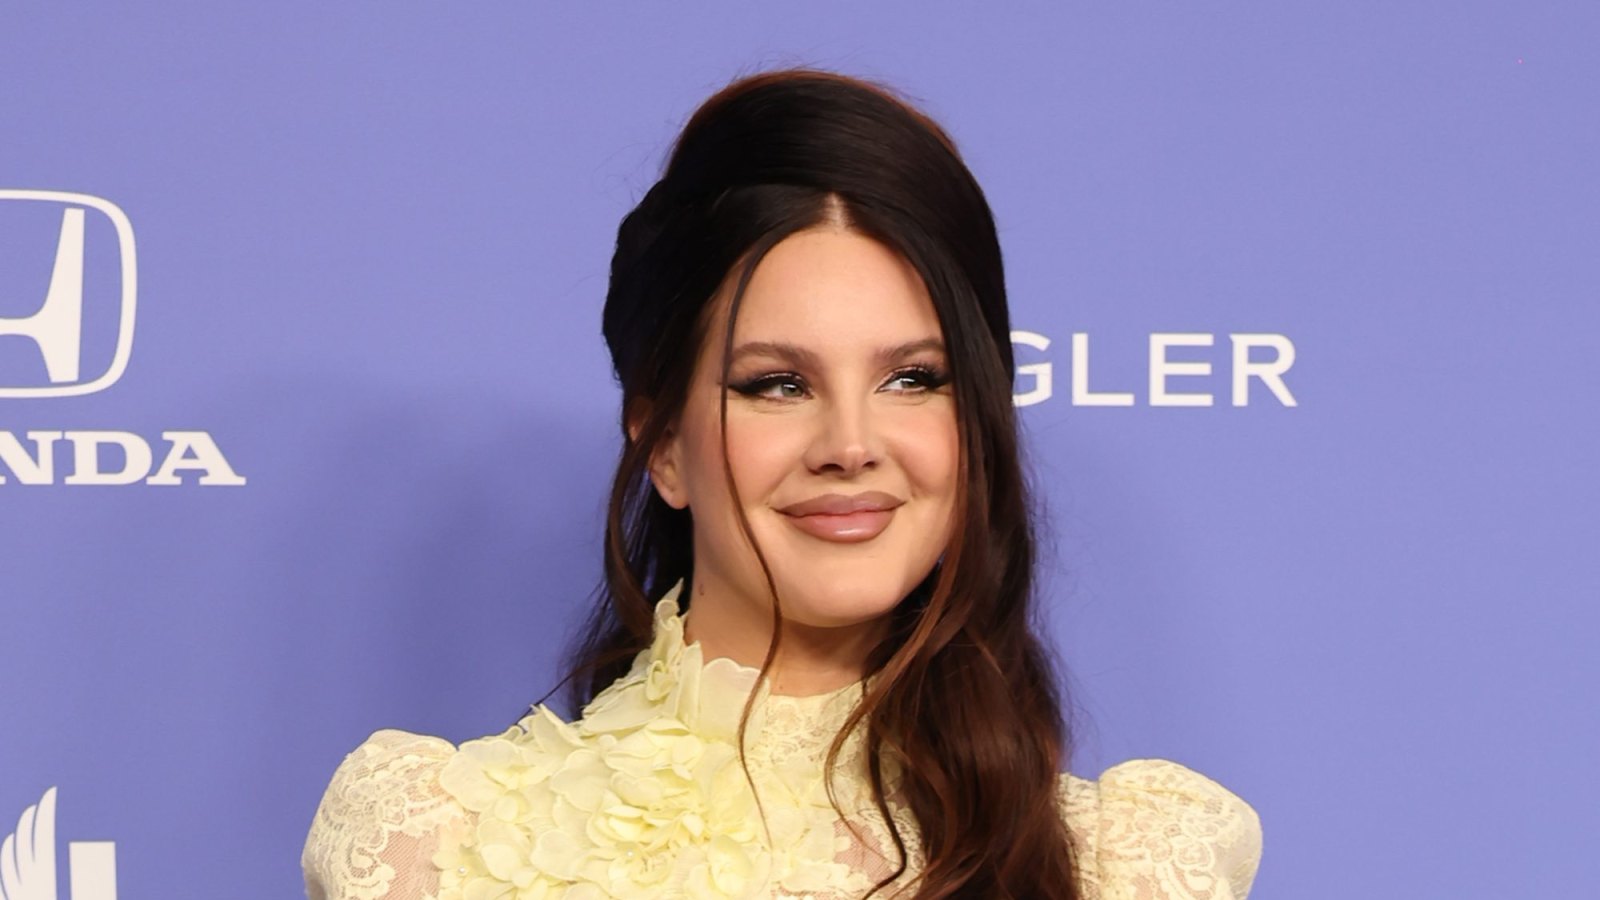 Lana Del Rey Claps Back At Influencer Claiming She Uses Witchcraft